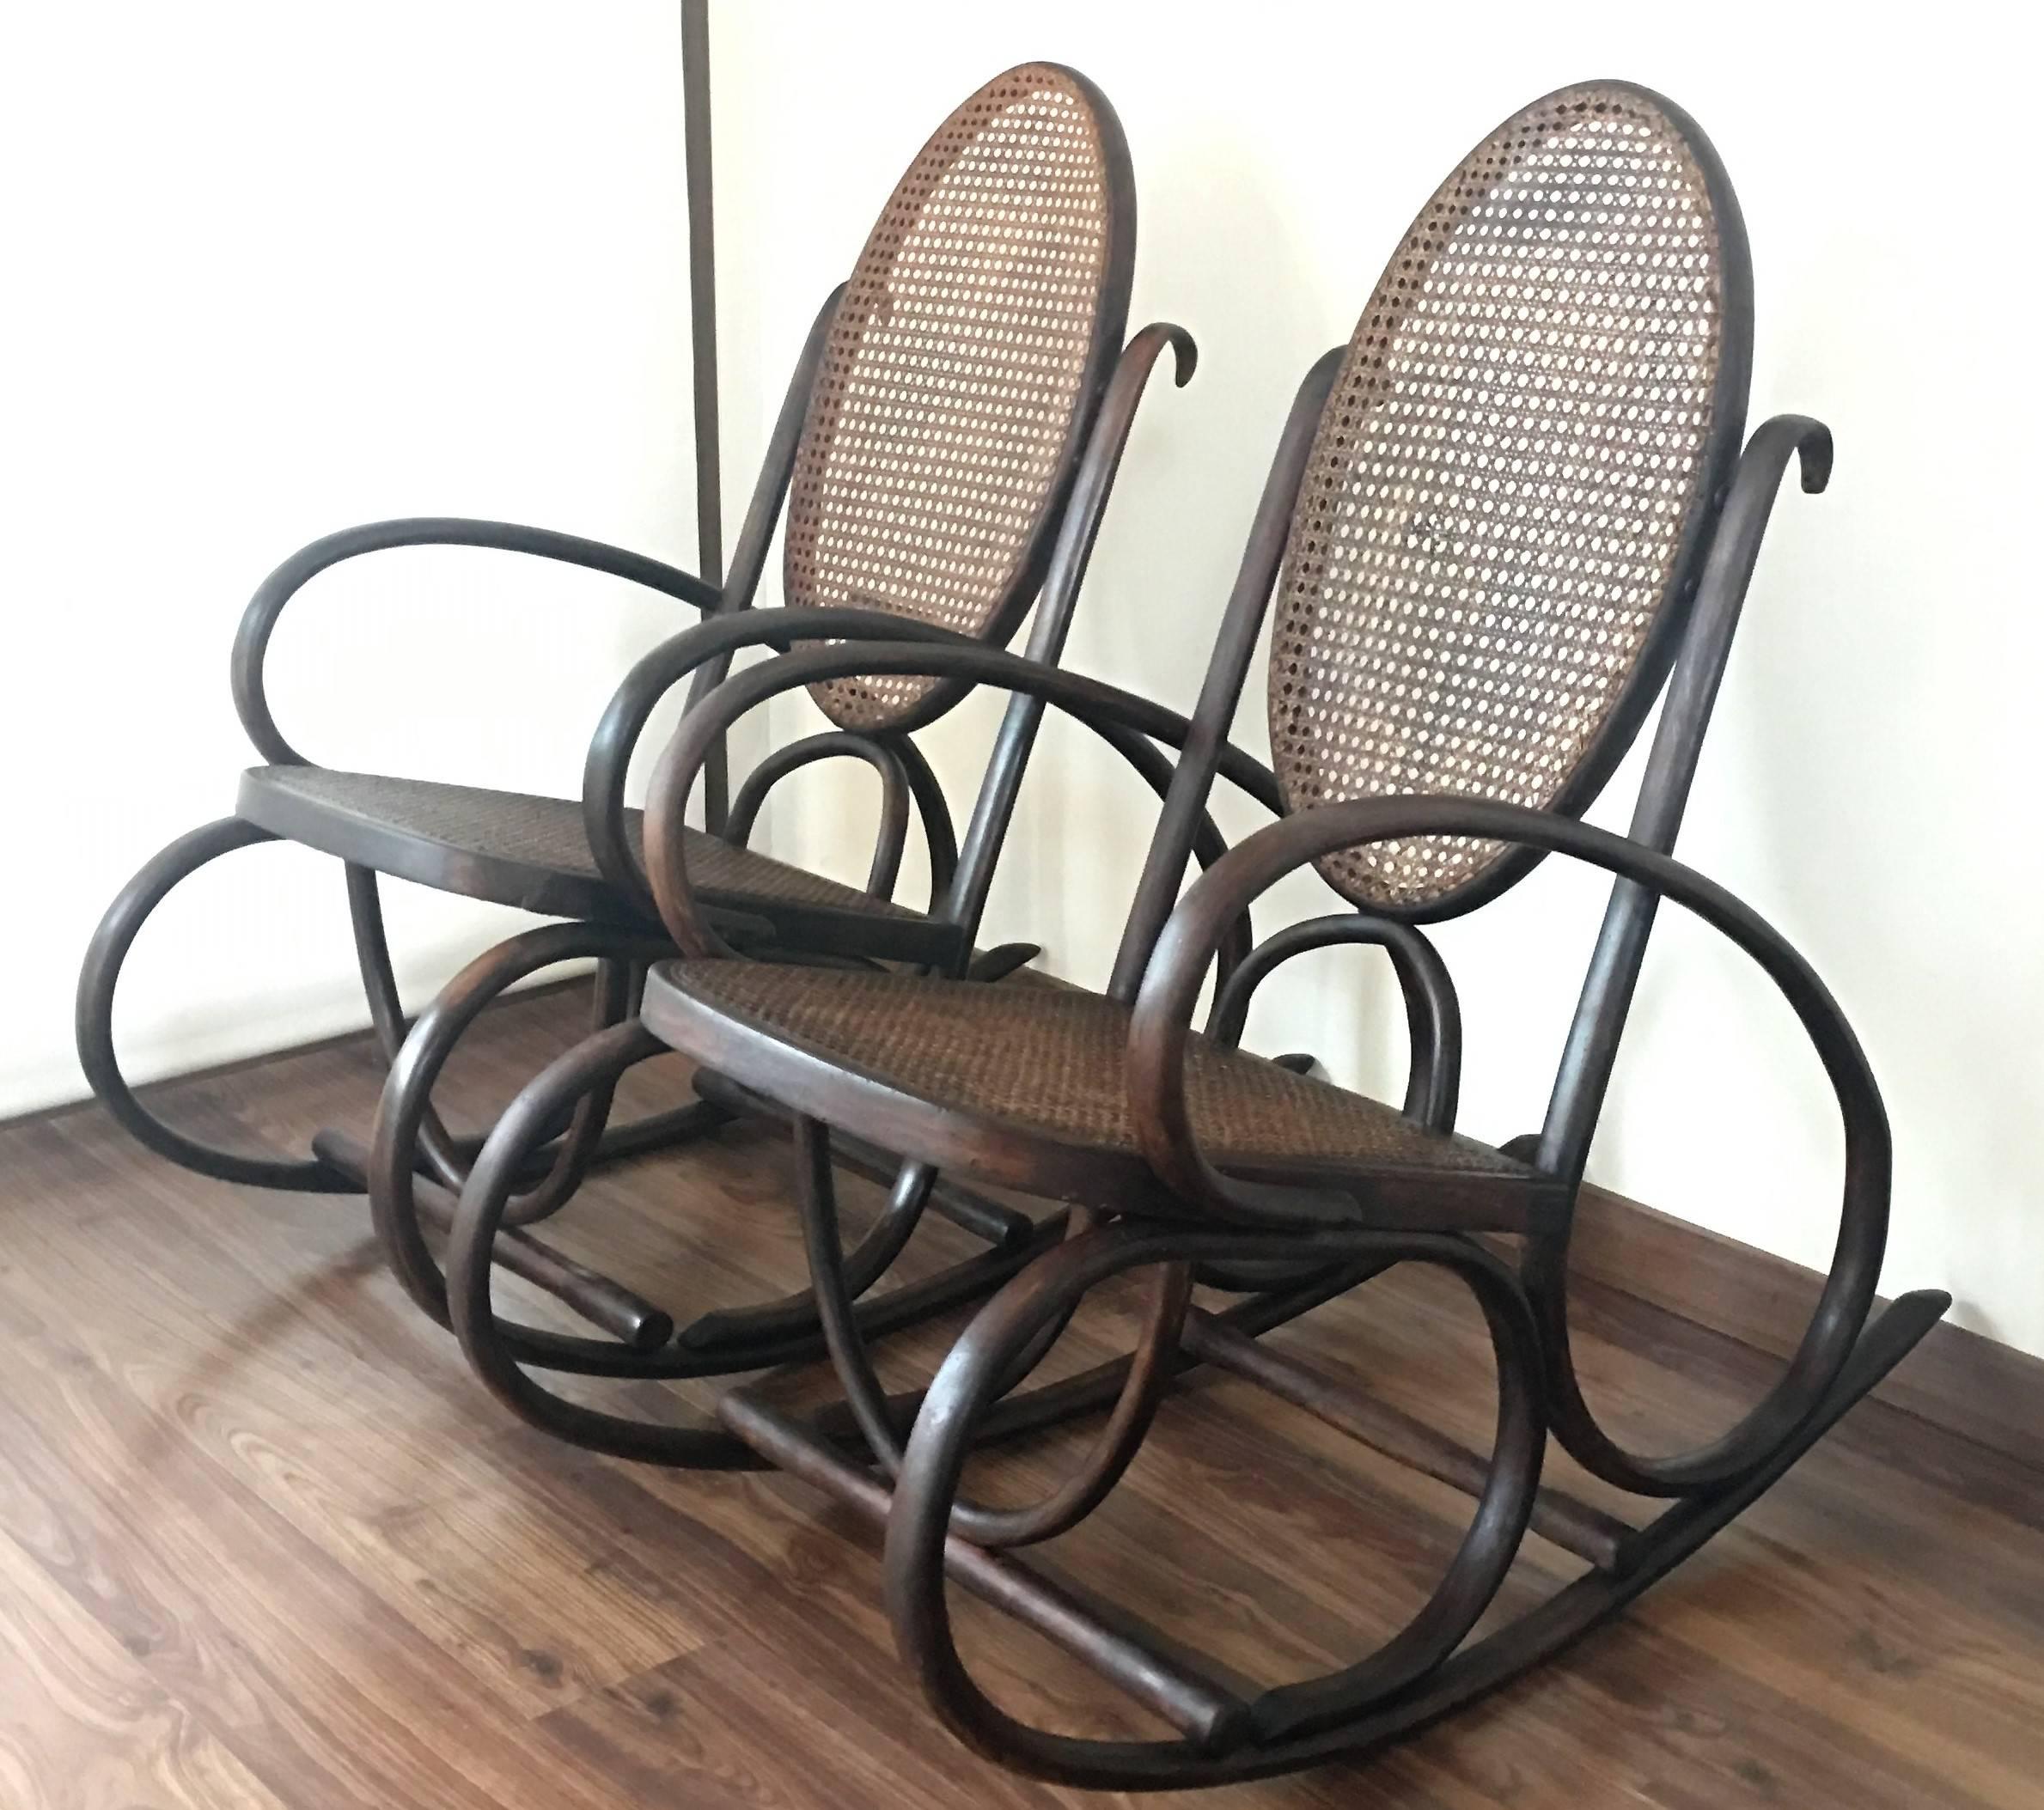 Art Deco Mid-Century Elegant Rattan Pair of Rocking Chairs in the Thonet Style